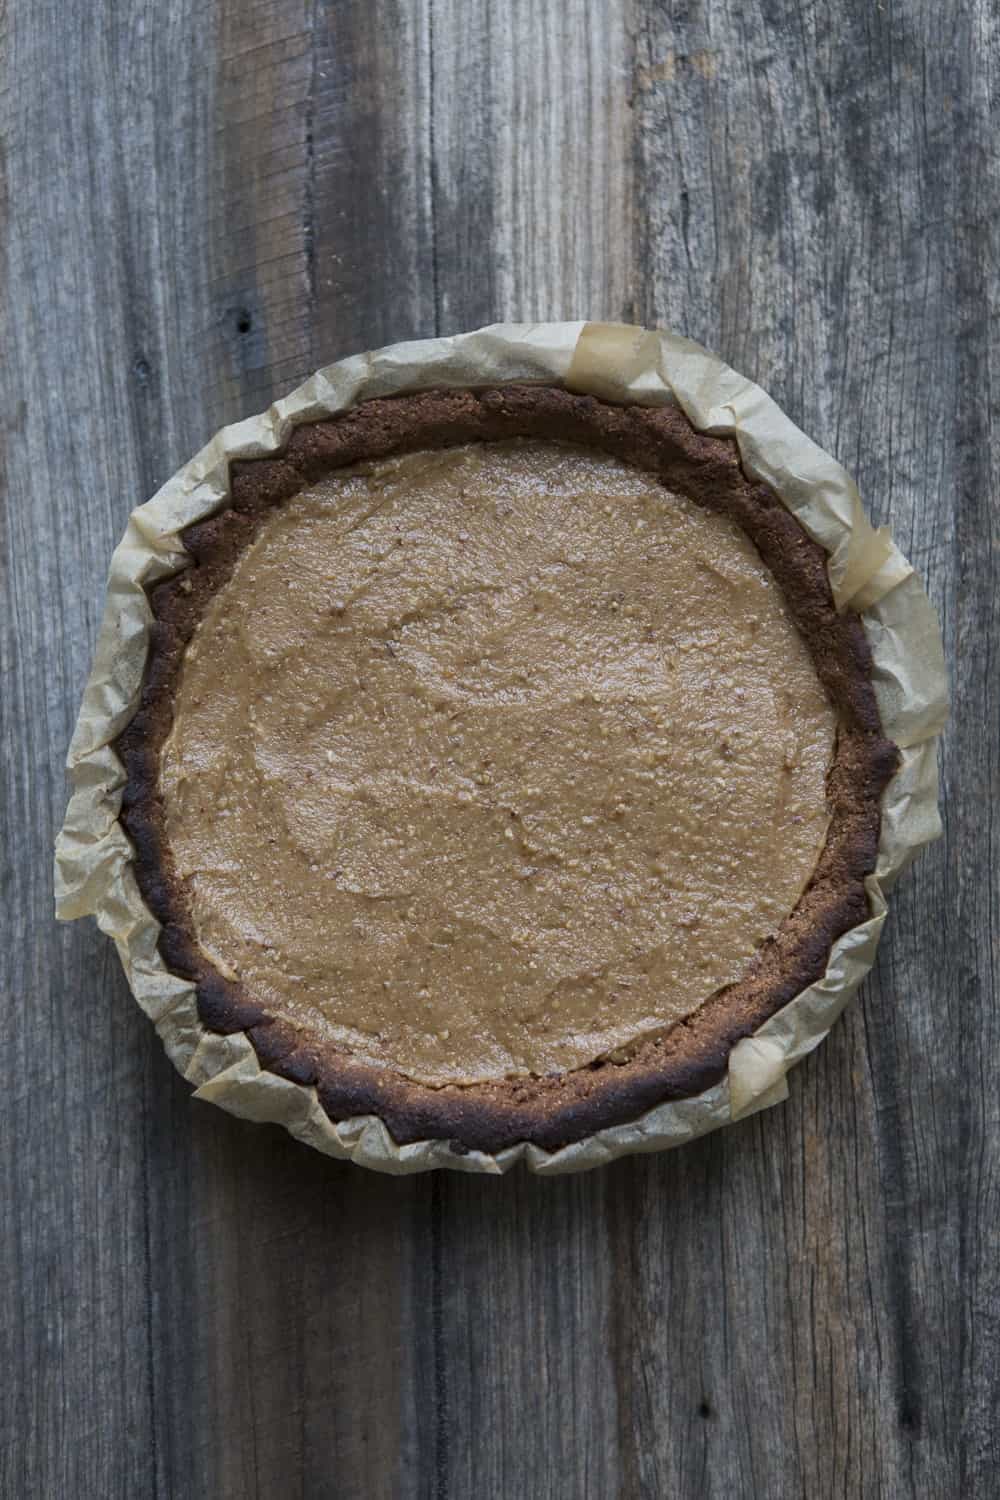 Vegan Peanut Butter & Chocolate Pie without chocolate topping.